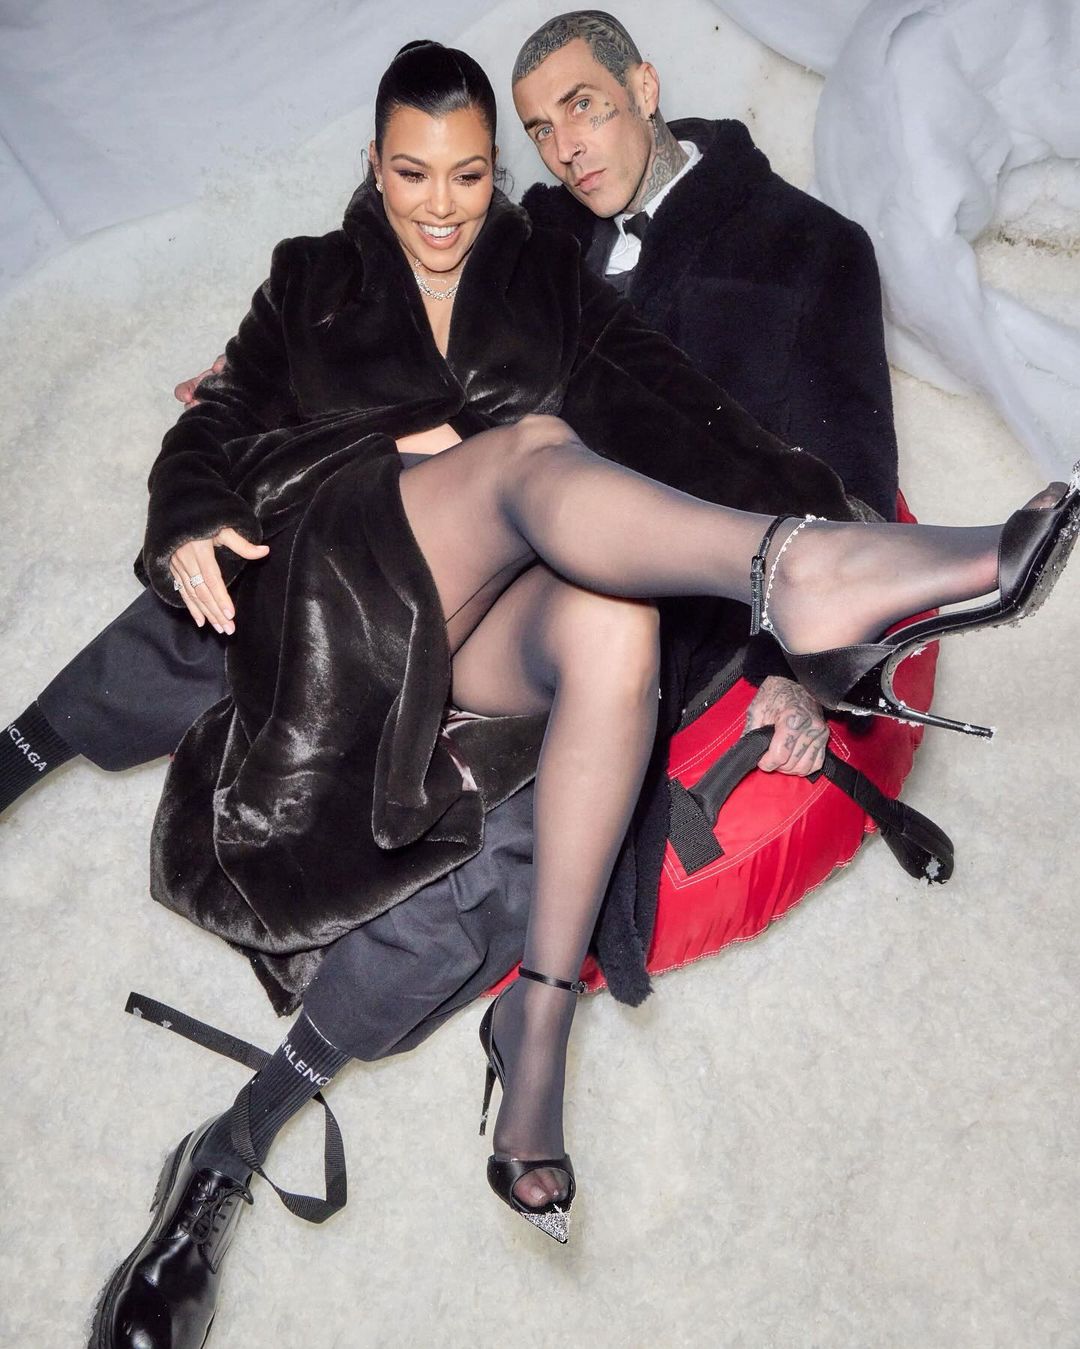 Kourtney recently uploaded snaps of her and Travis while they were enjoying Kim's Christmas Eve bash on Instagram